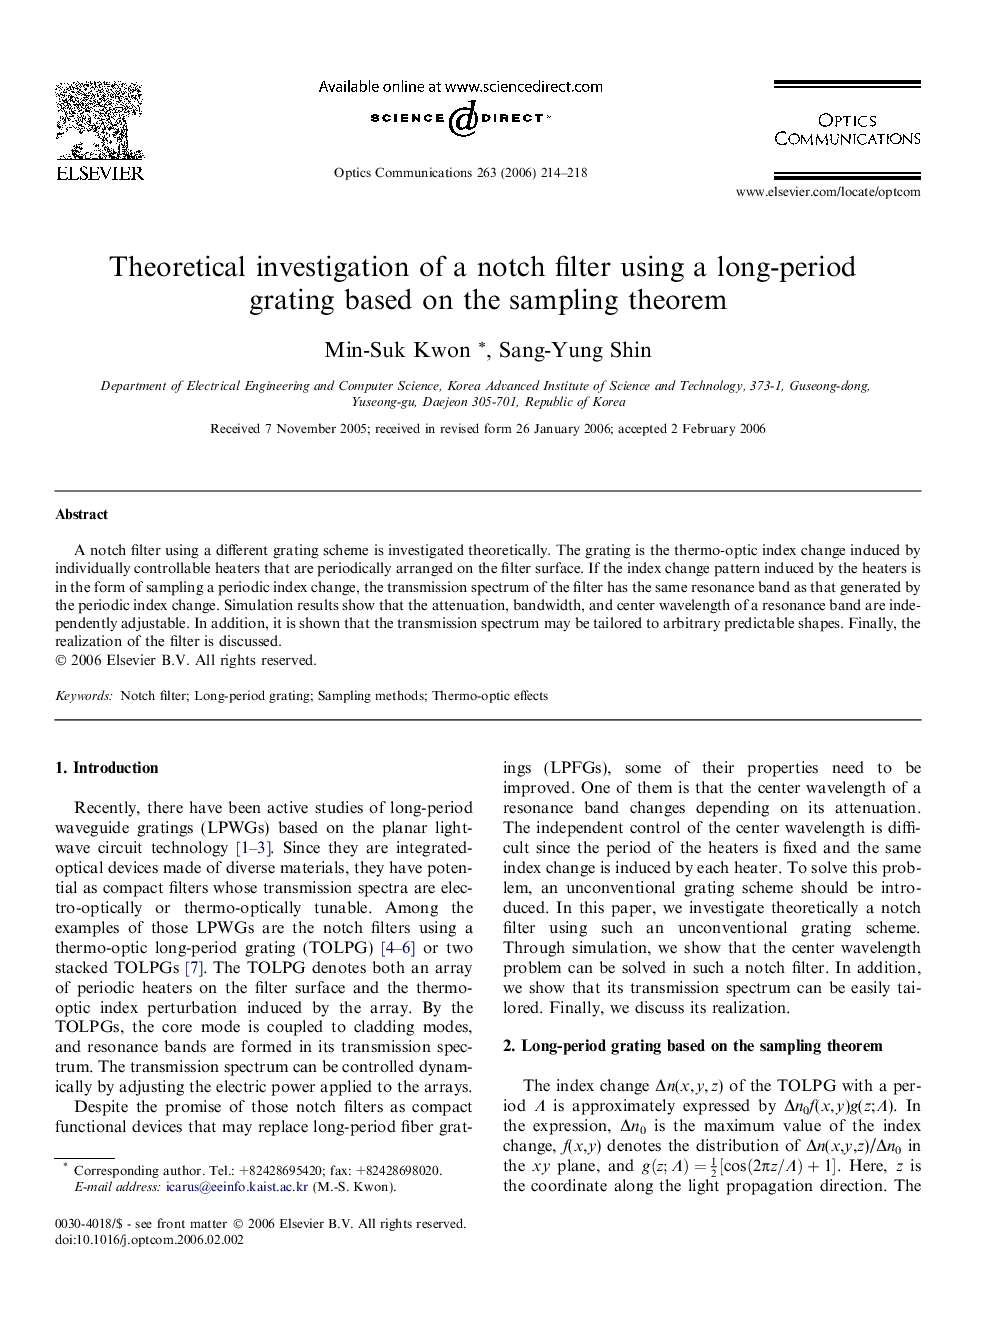 Theoretical investigation of a notch filter using a long-period grating based on the sampling theorem